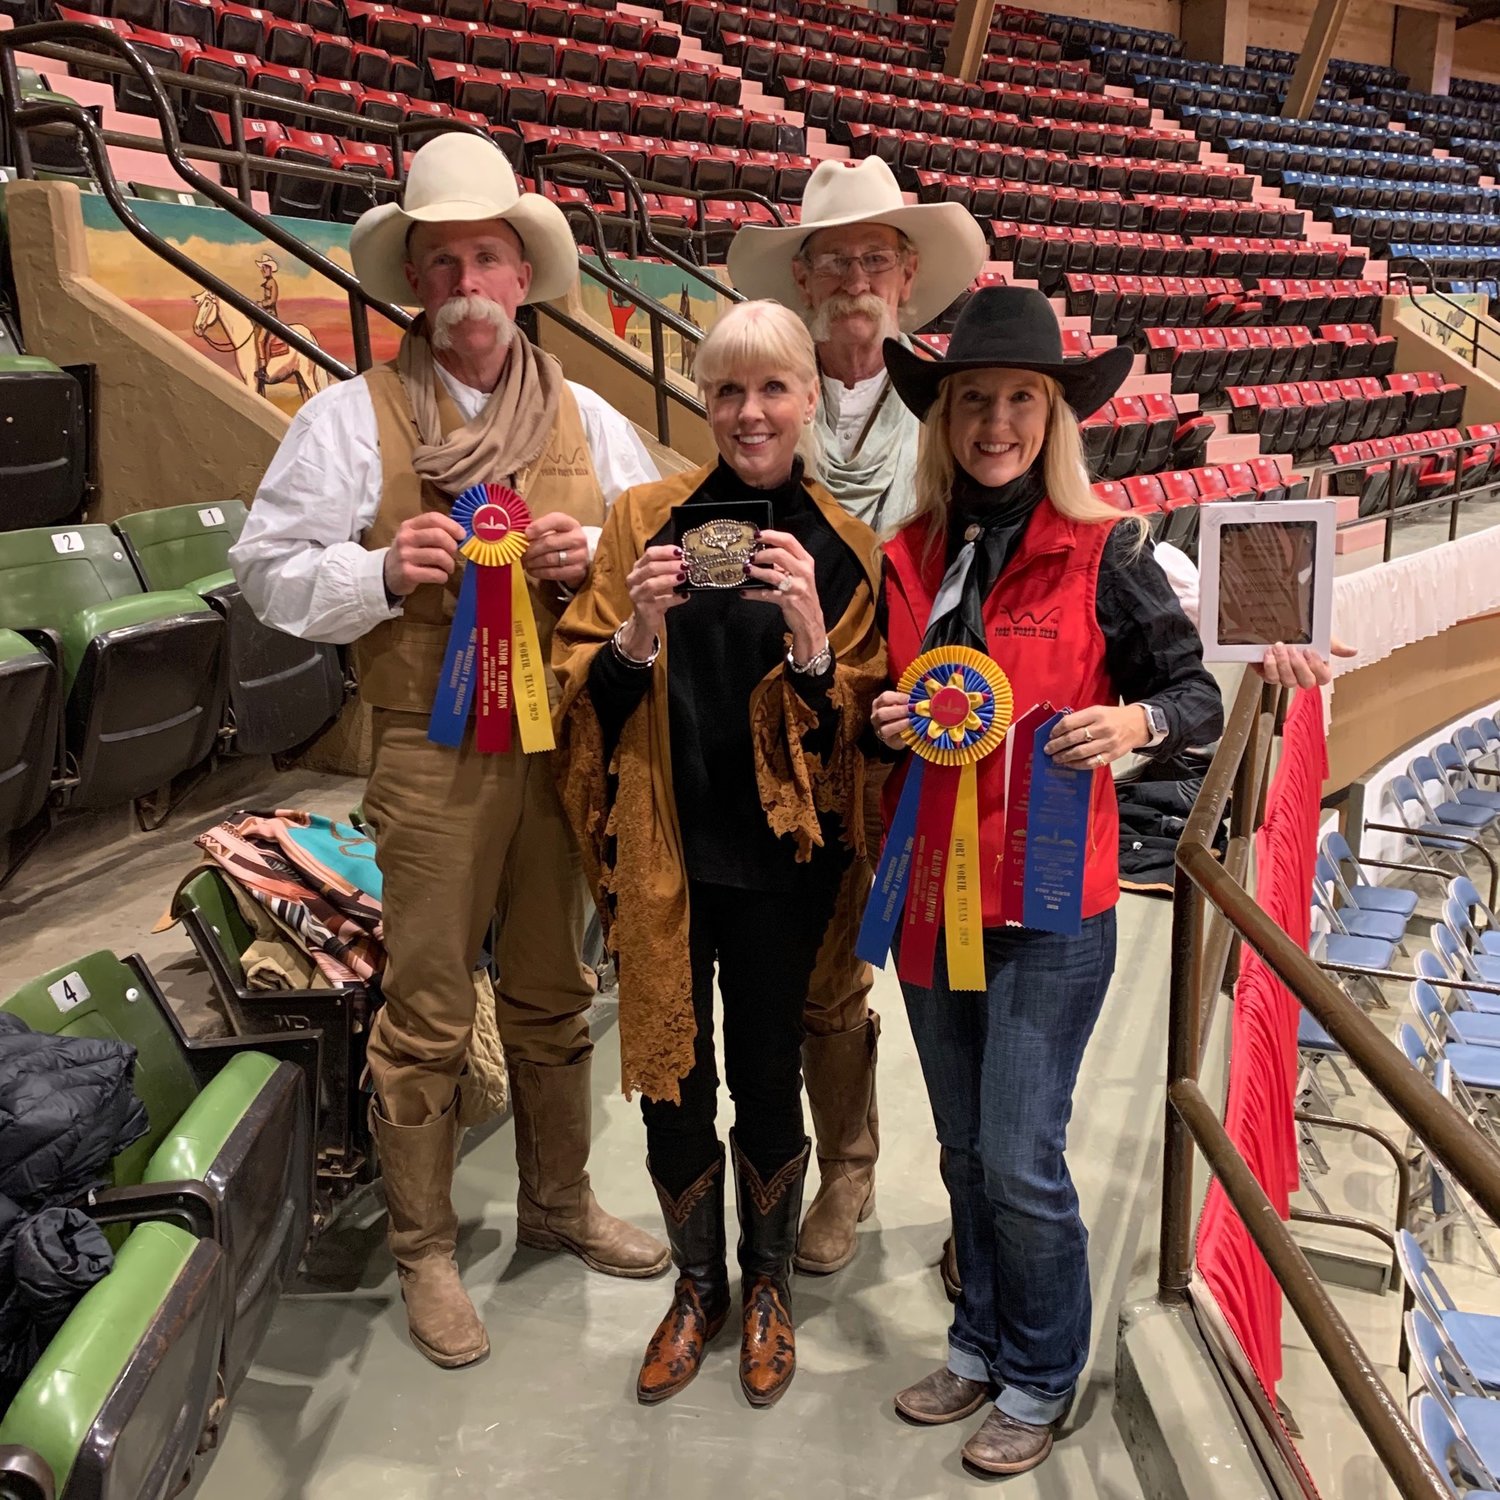 From left, David Mangold, herd drover; Rebecca Wampler, steer donor; Daryl Border, herd drover; and Kristin Jaworski, herd trail boss with the longhorn trophies.